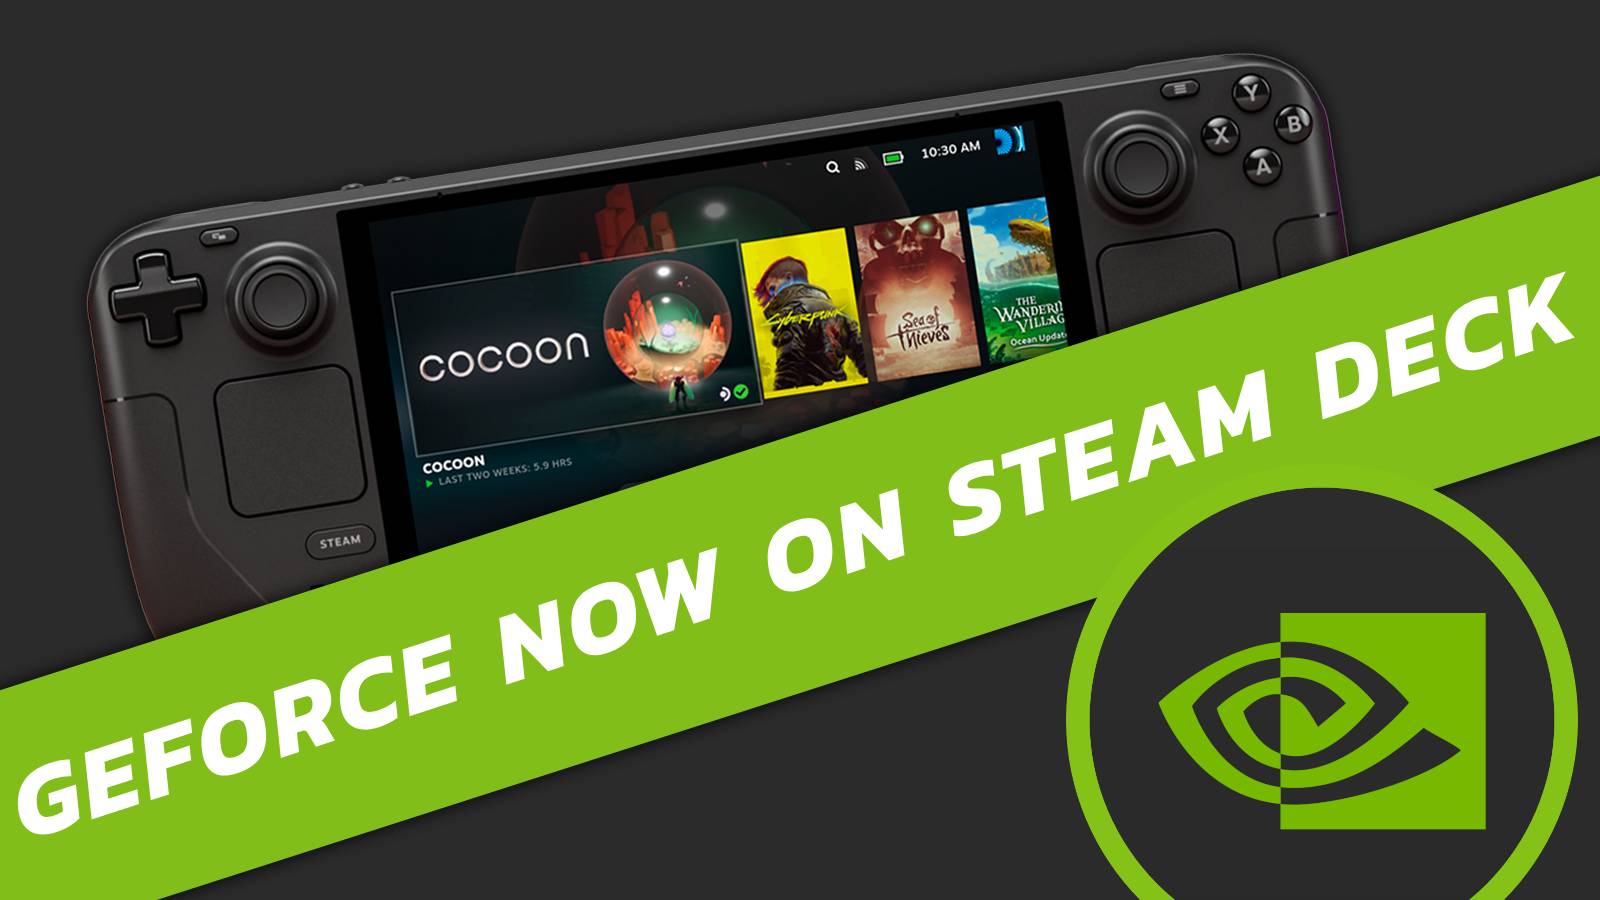 Image of a Steam Deck, with a green banner and the Nvidia logo in the right corner.